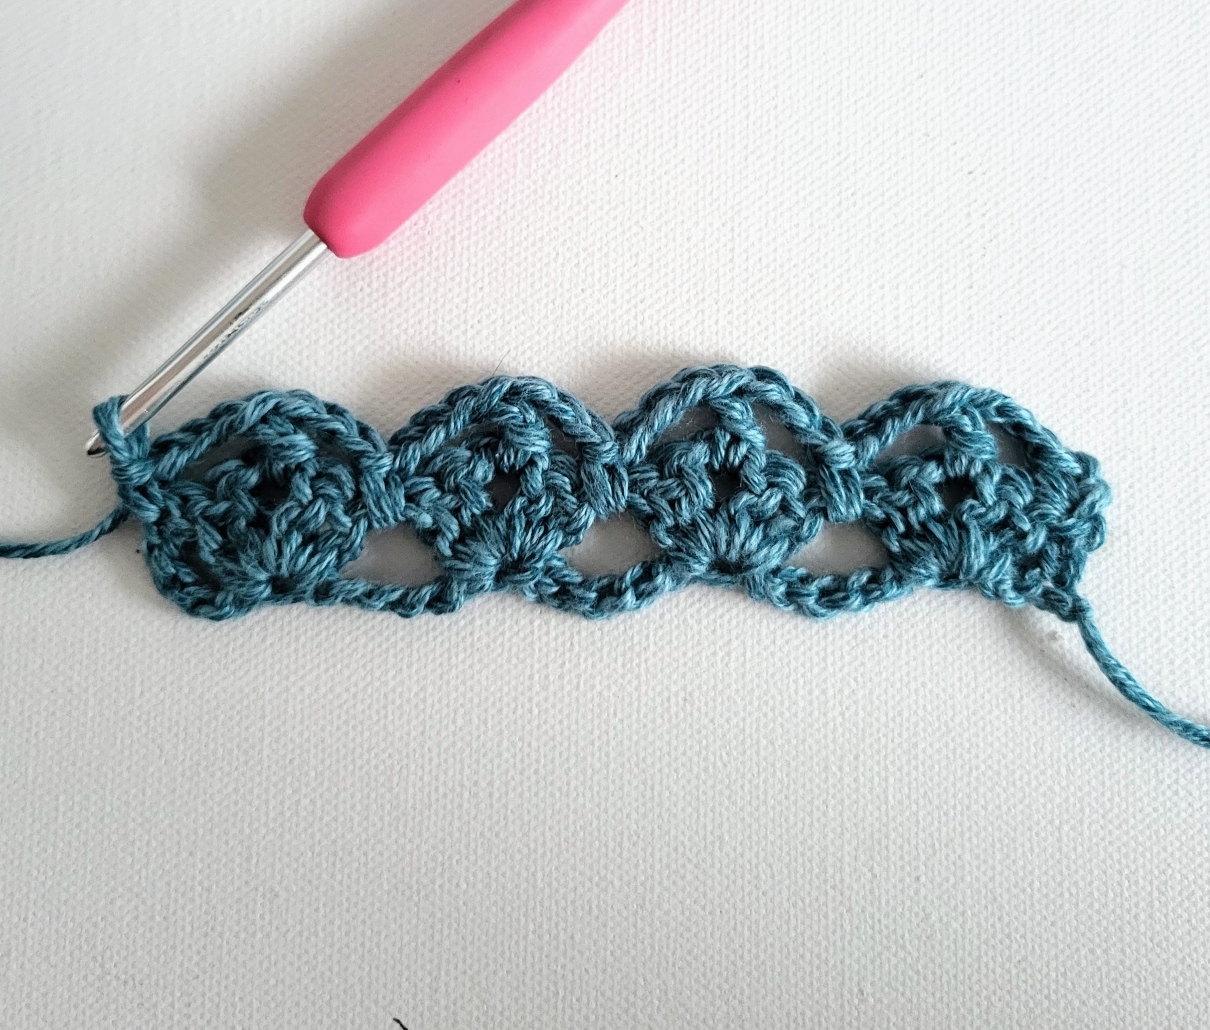 row 2 of a crochet sample and a pink hook